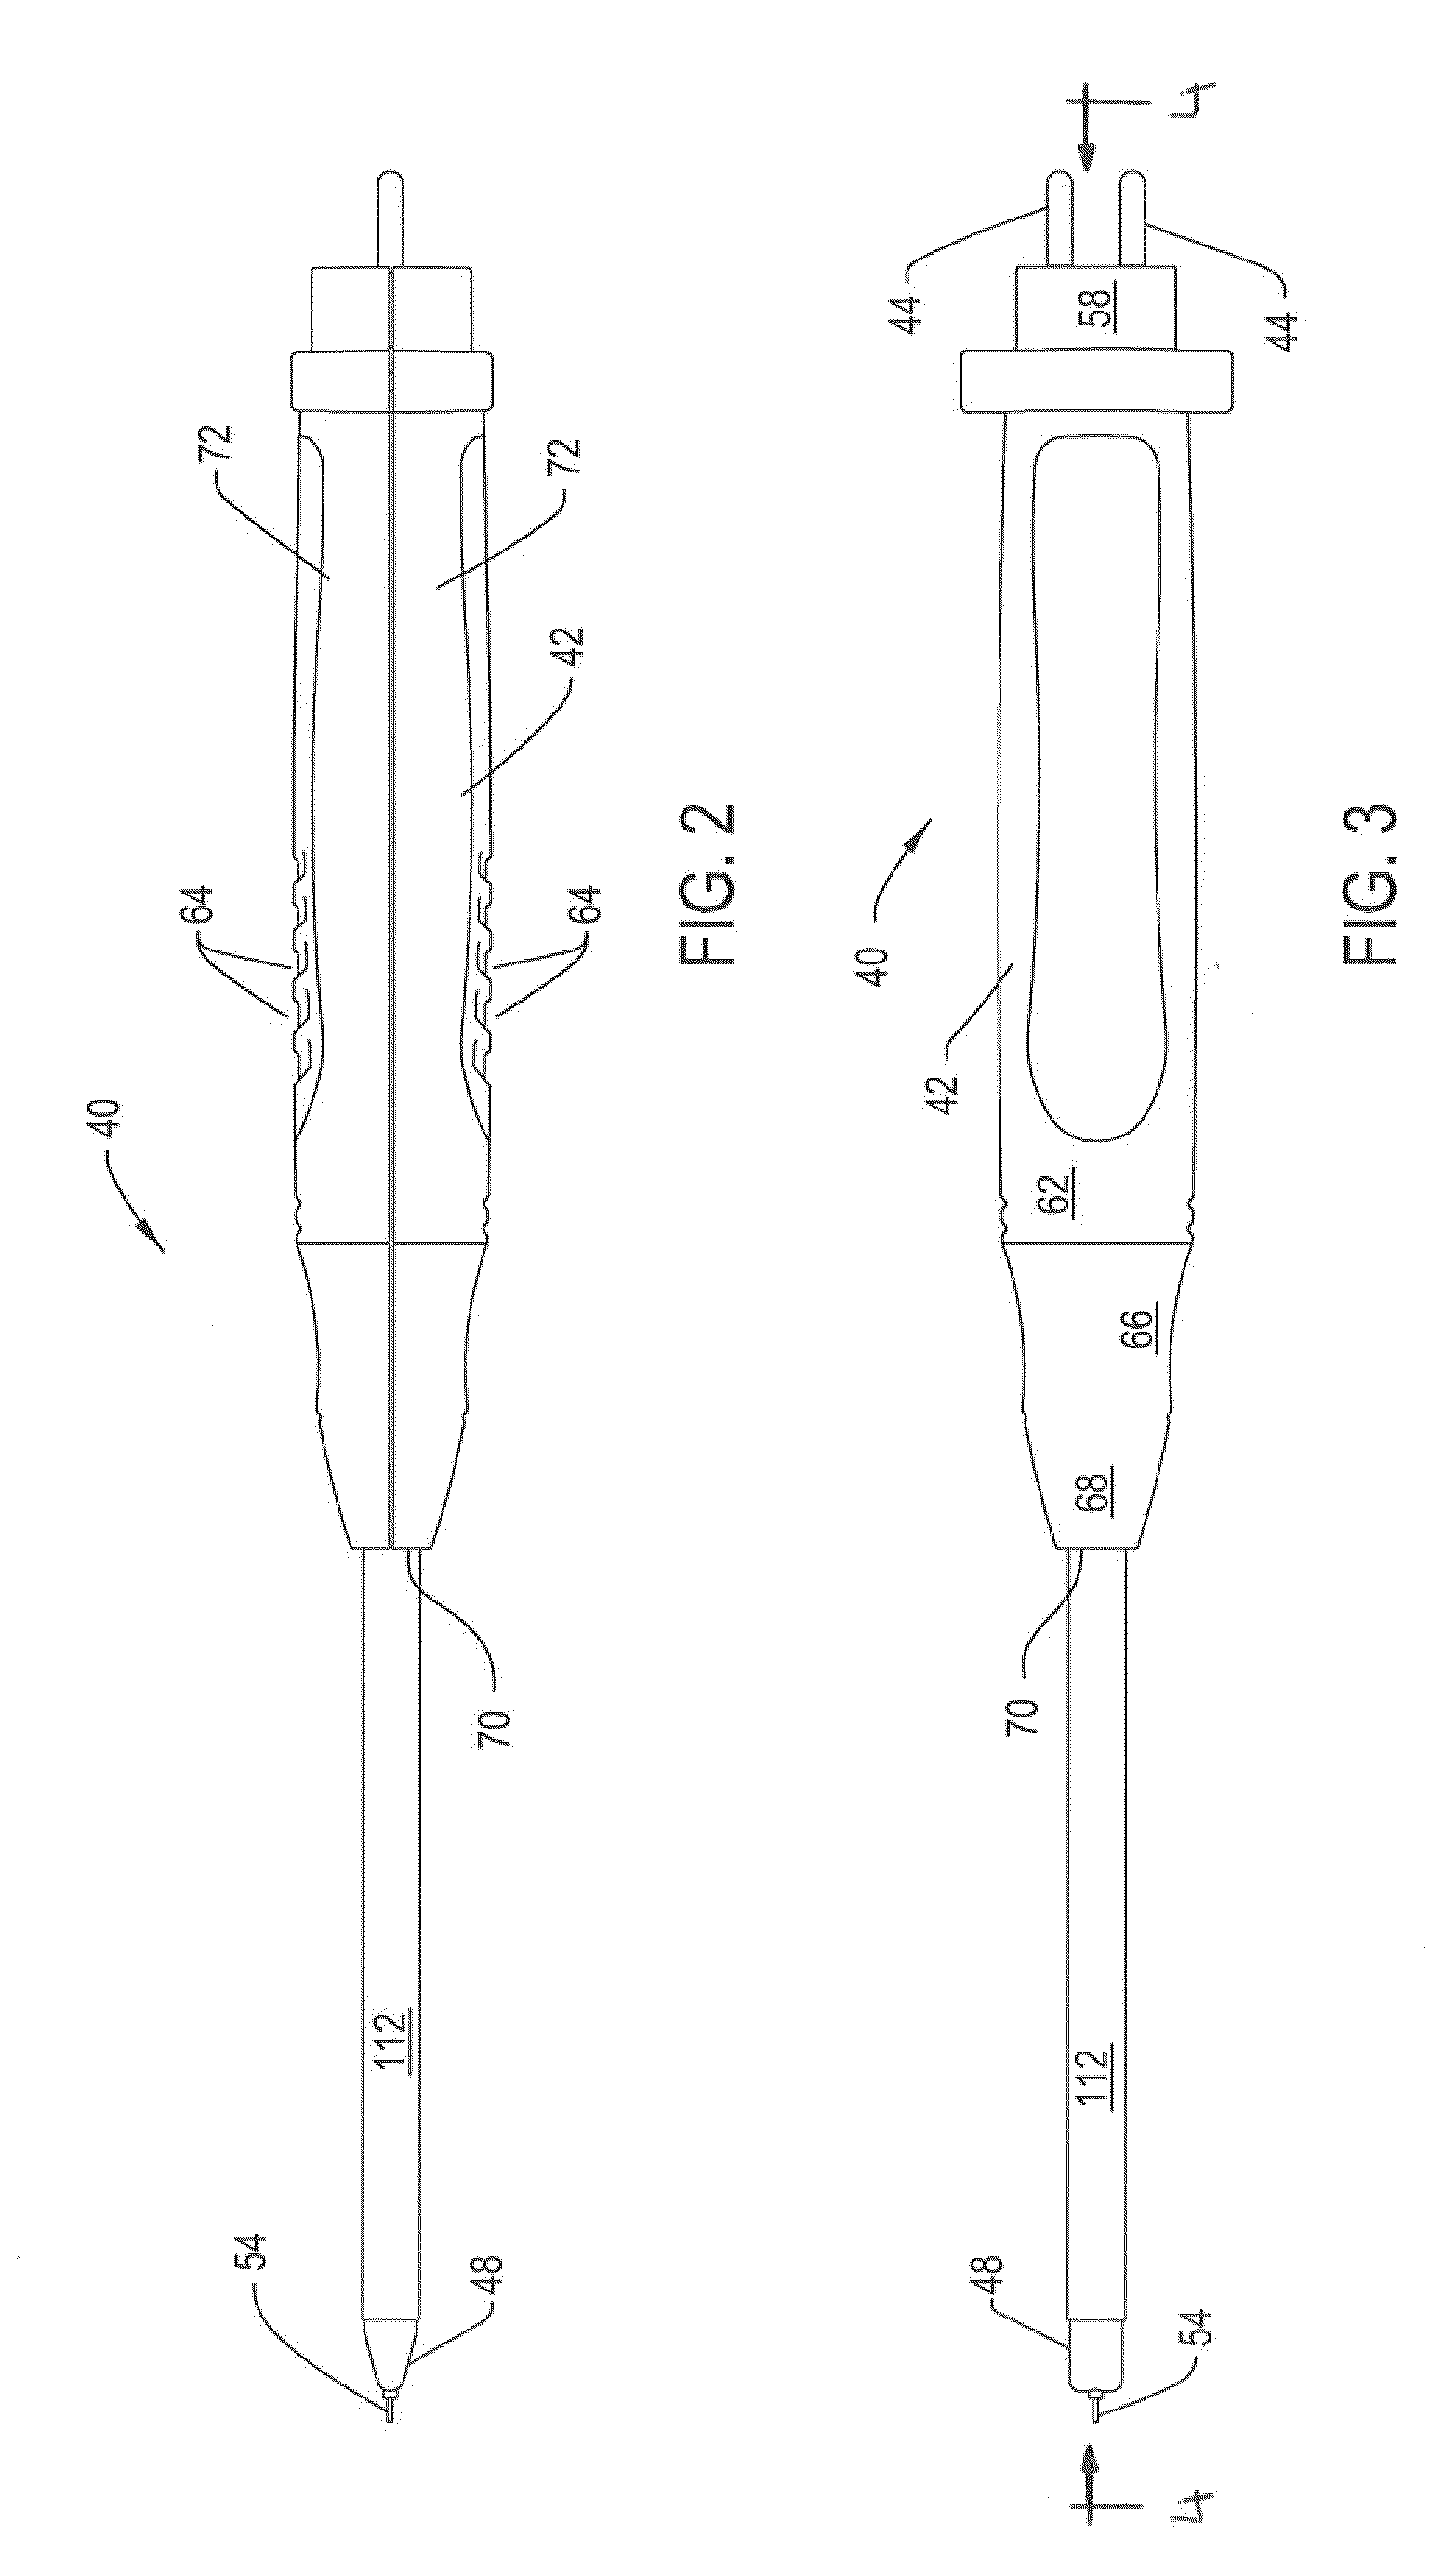 Bipolar electrosurgical tool with active and return electrodes shaped to foster diffuse current flow in the tissue adjacent the return electrode